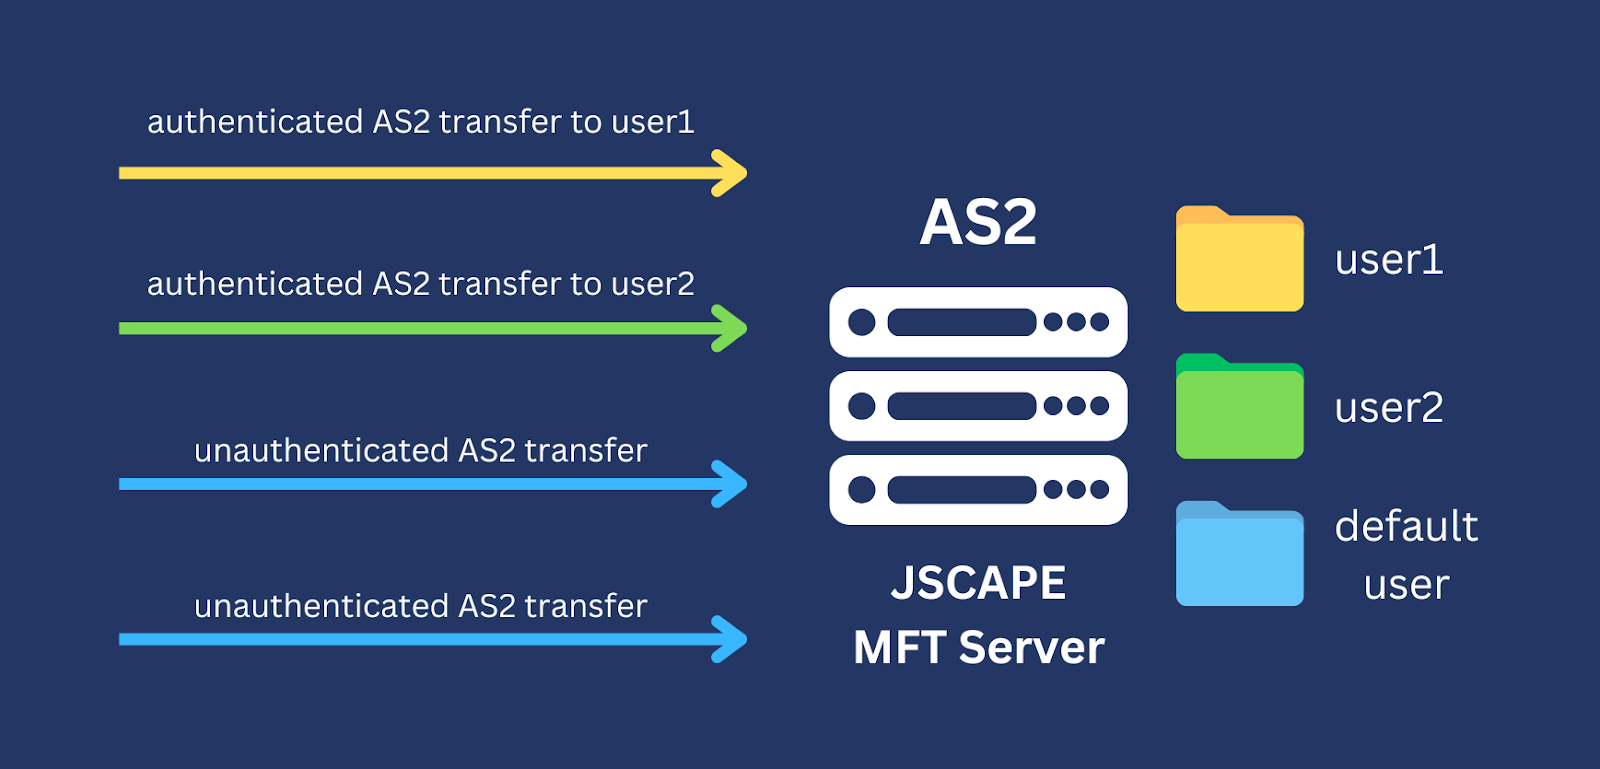 AS2 connection with the JSCAPE MFT Server